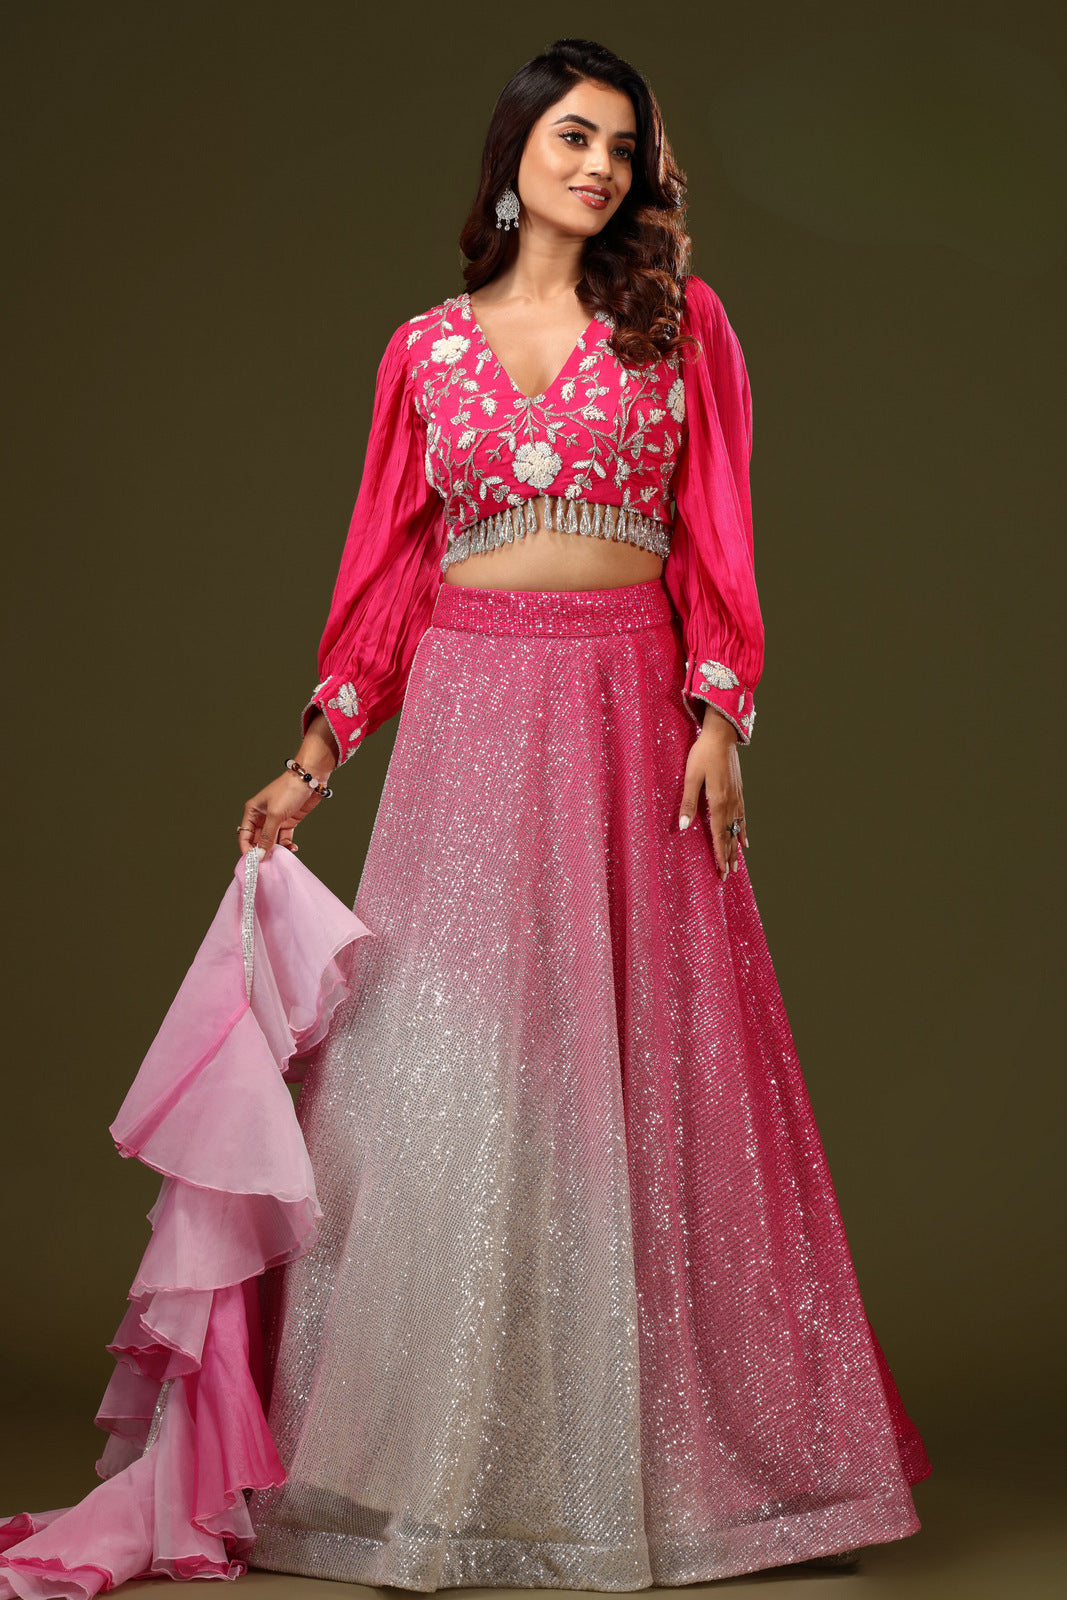 Pink with Cream Shaded Beads, Thread and Sequins work Crop Top Lehenga